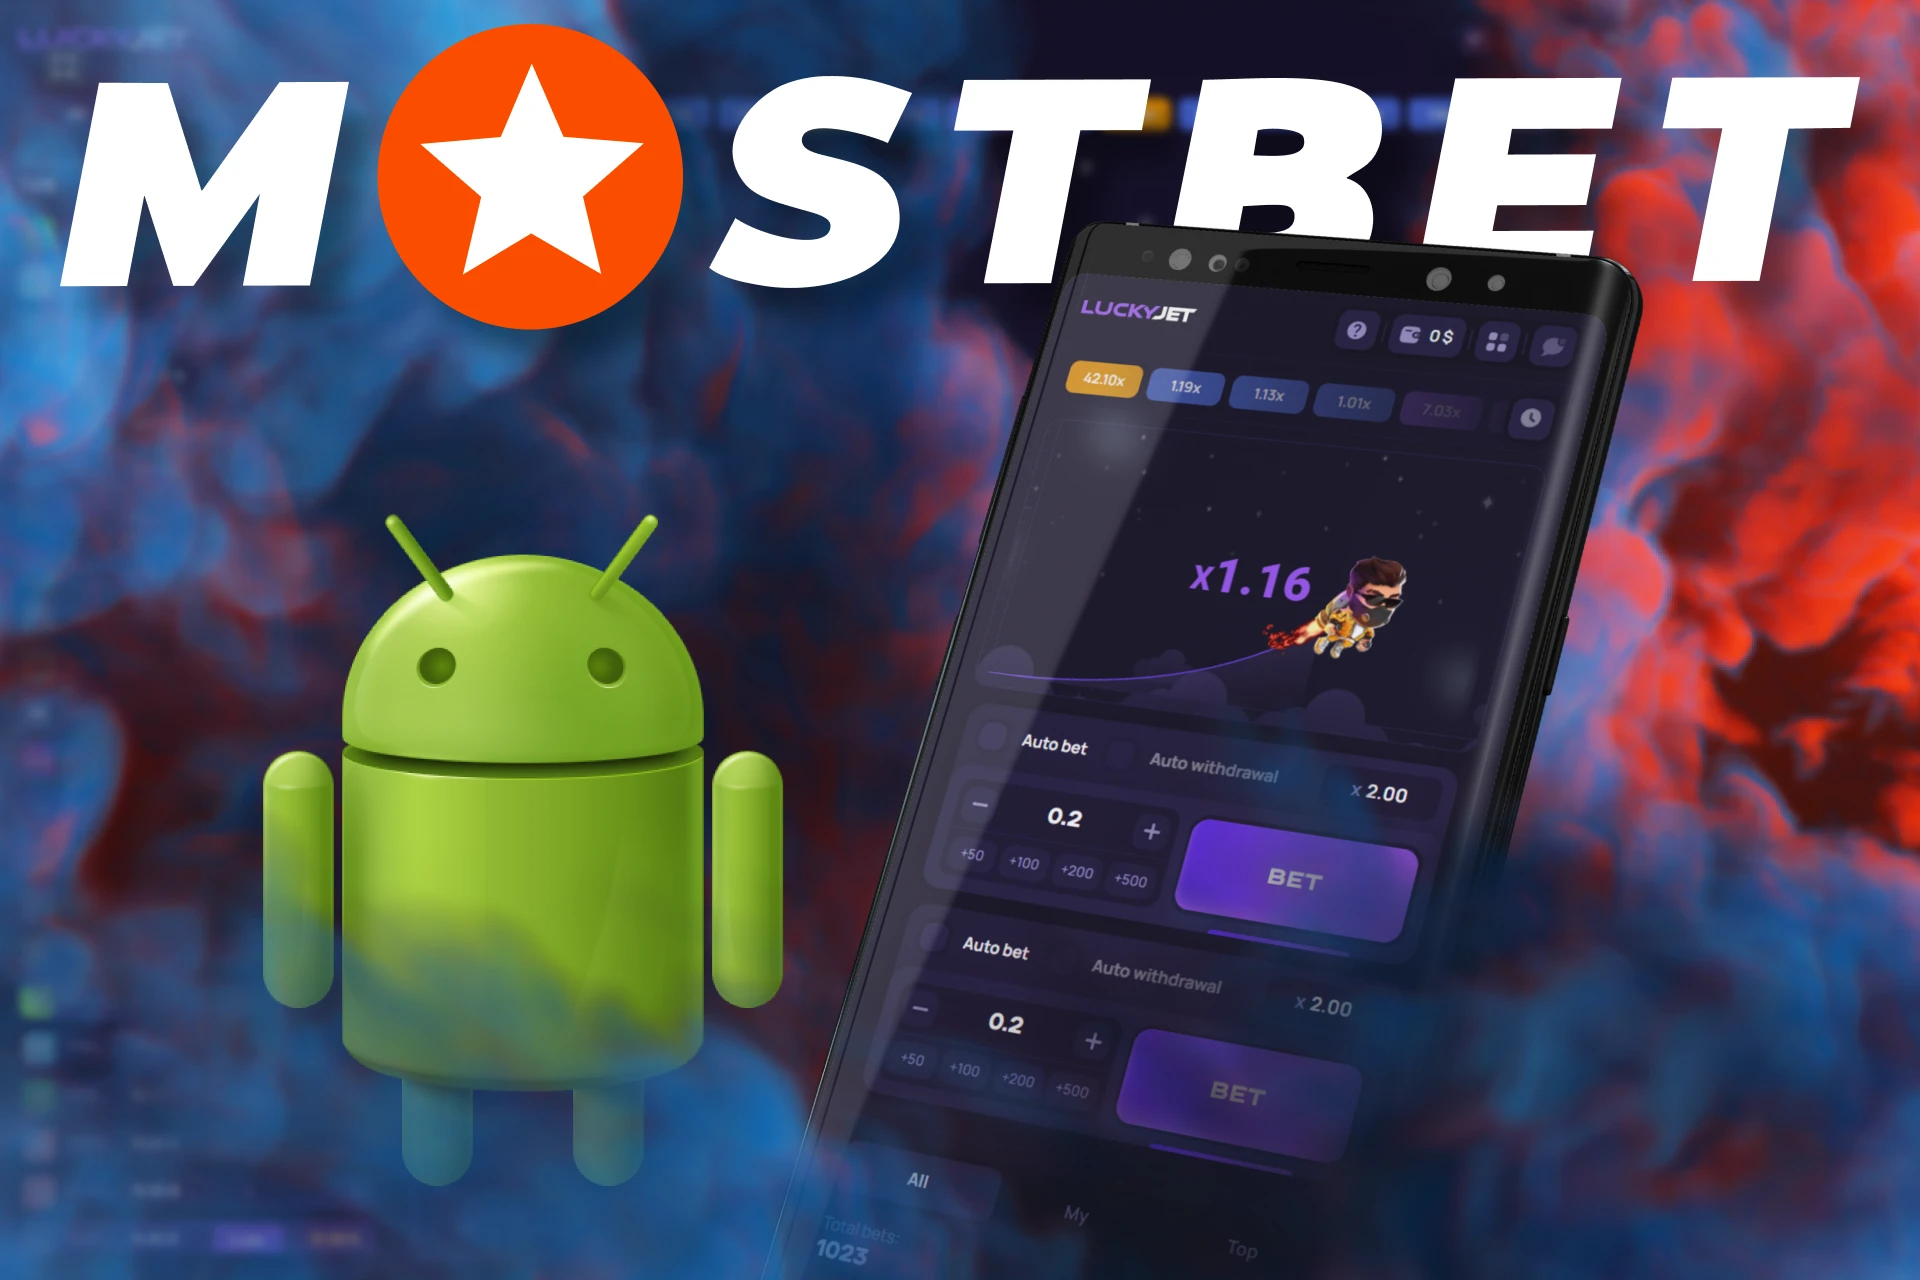 At Mostbet, play Lucky Jet on any of your Android devices.